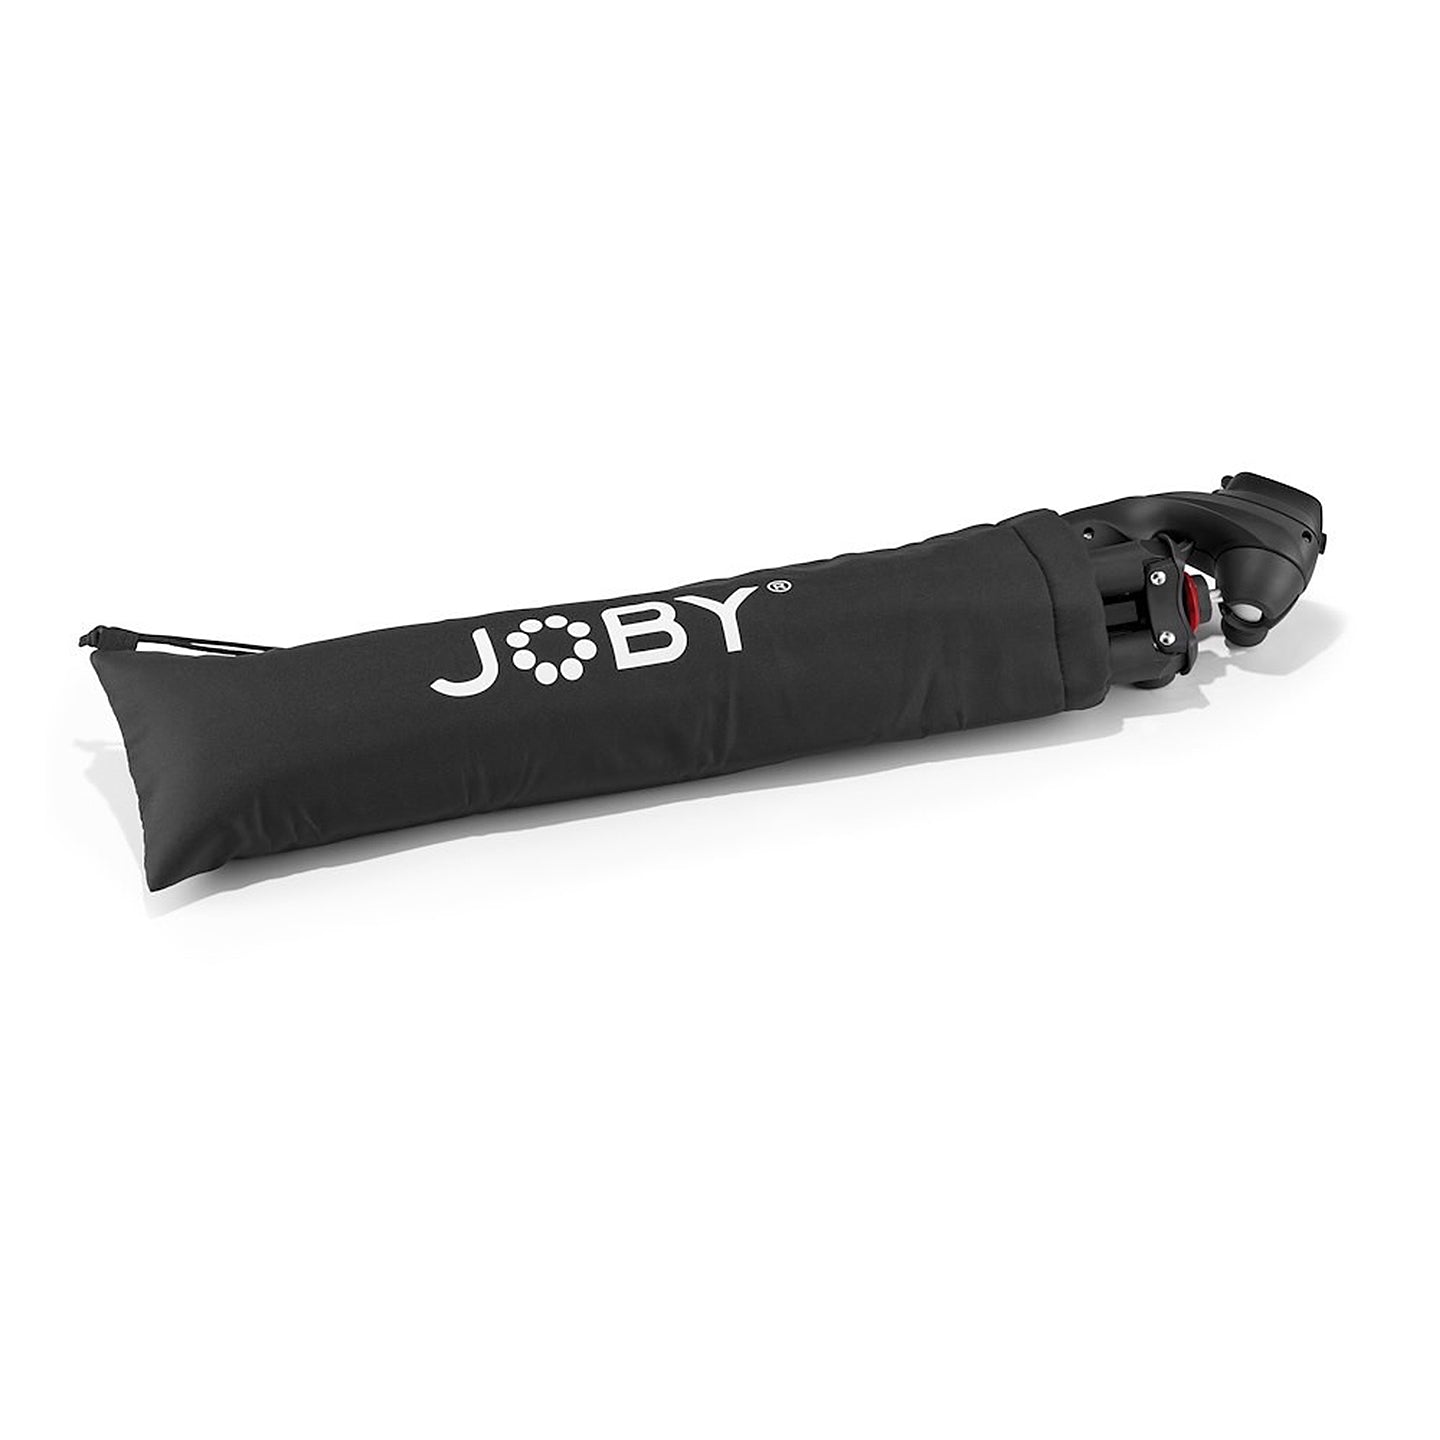 JOBY Compact Action Tripod Kit with Ball Head Camera Mount, 1.5kg Weight Capacity, Carry Bag for DSLR, Mirrorless & Compact Cameras | 1762